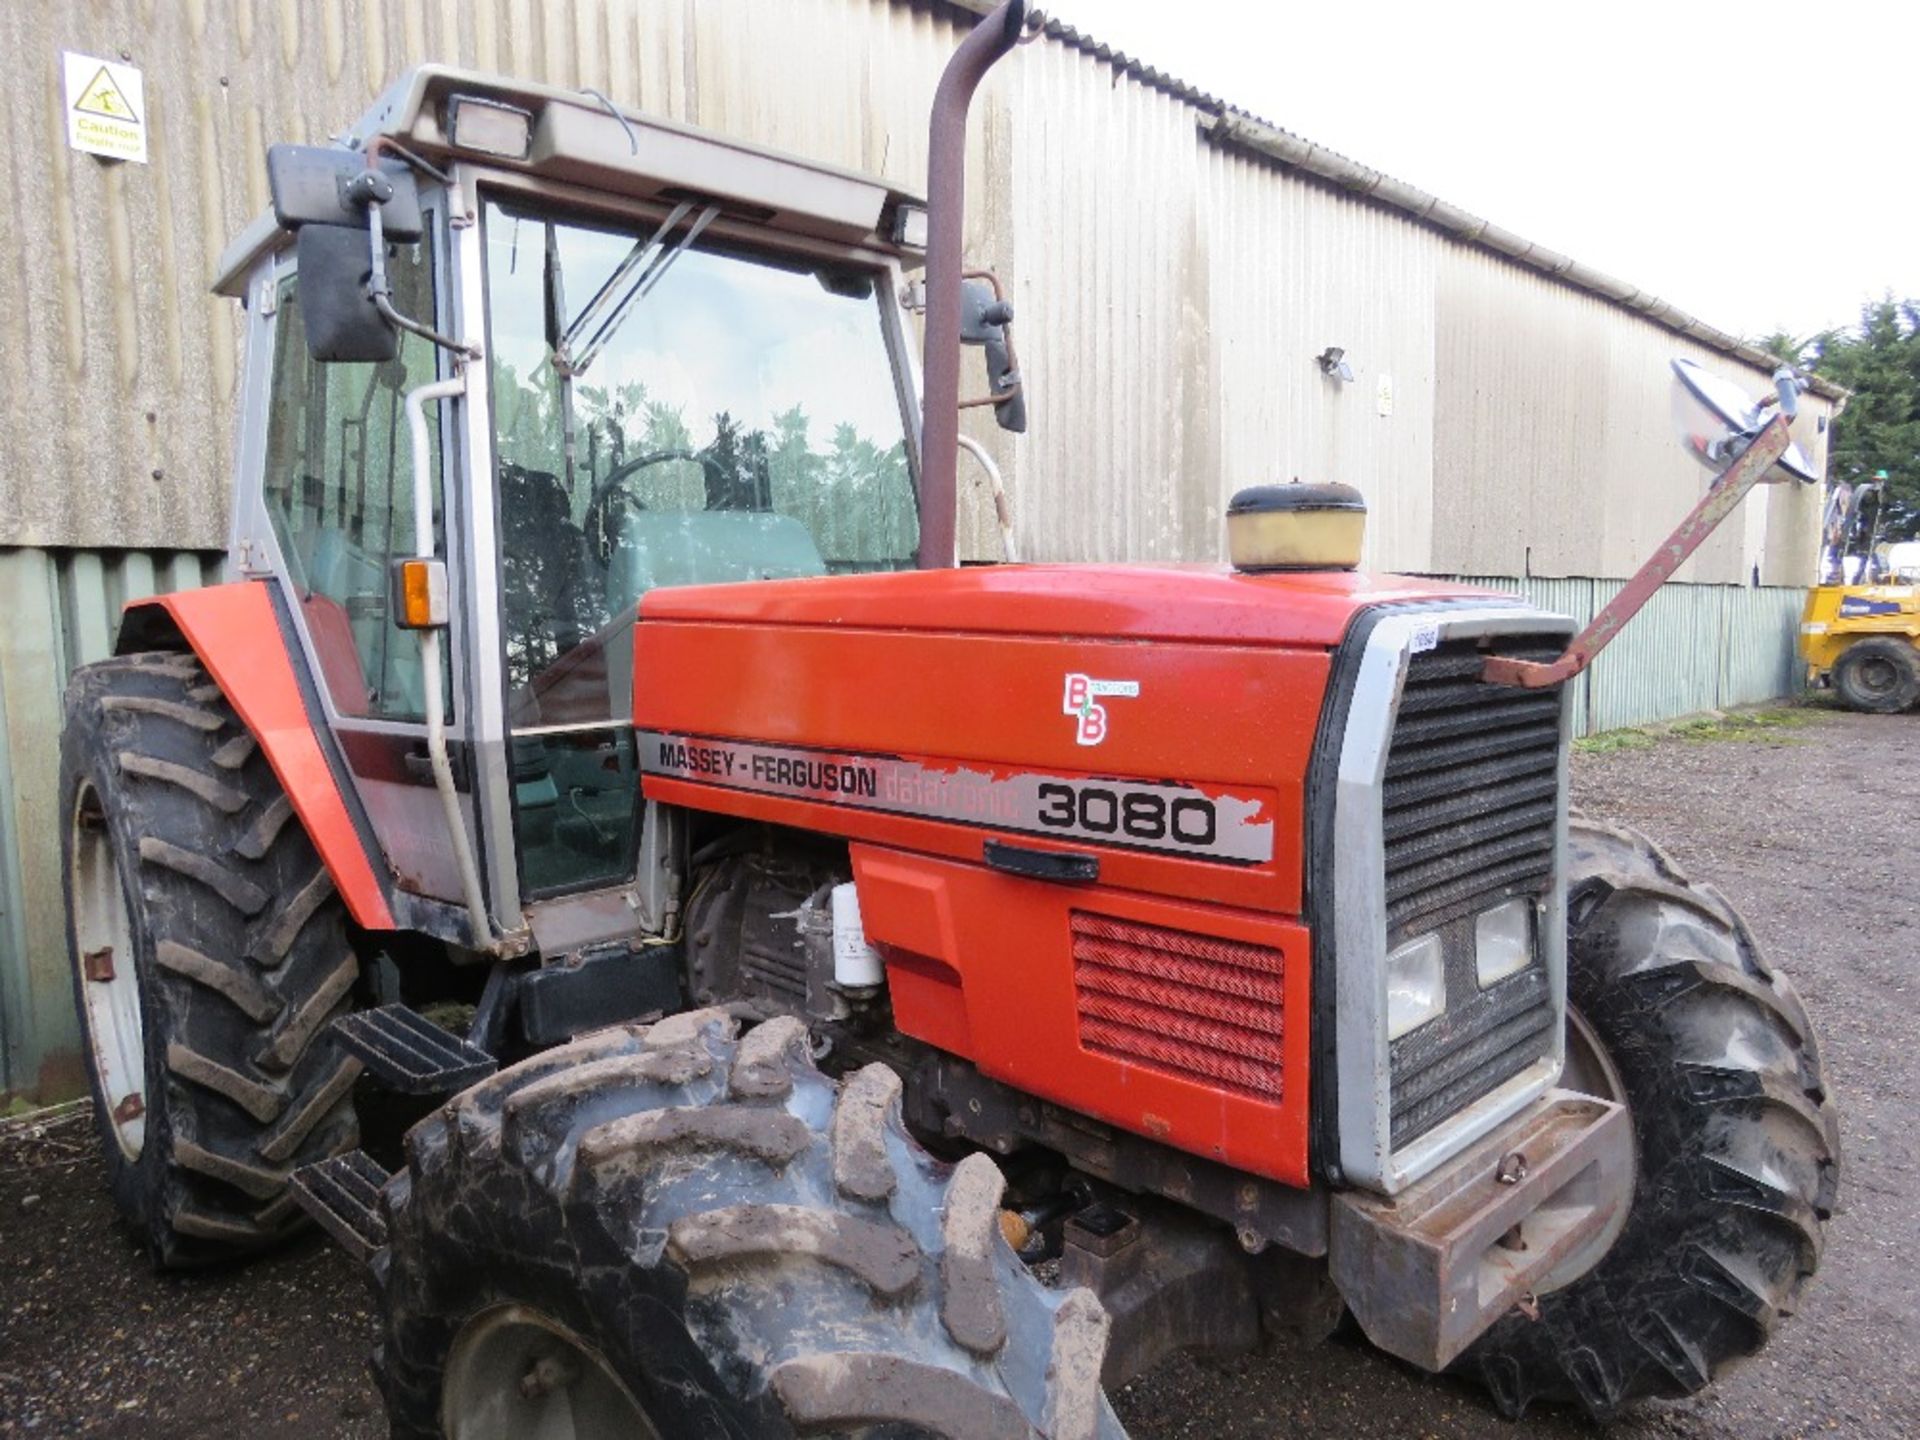 MASSEY FERGUSON 3080 4WD TRACTOR REG:H786 LFA (V5 TO APPLY FOR), 7165 REC HOURS. WHEN TESTED THIS M - Image 11 of 11